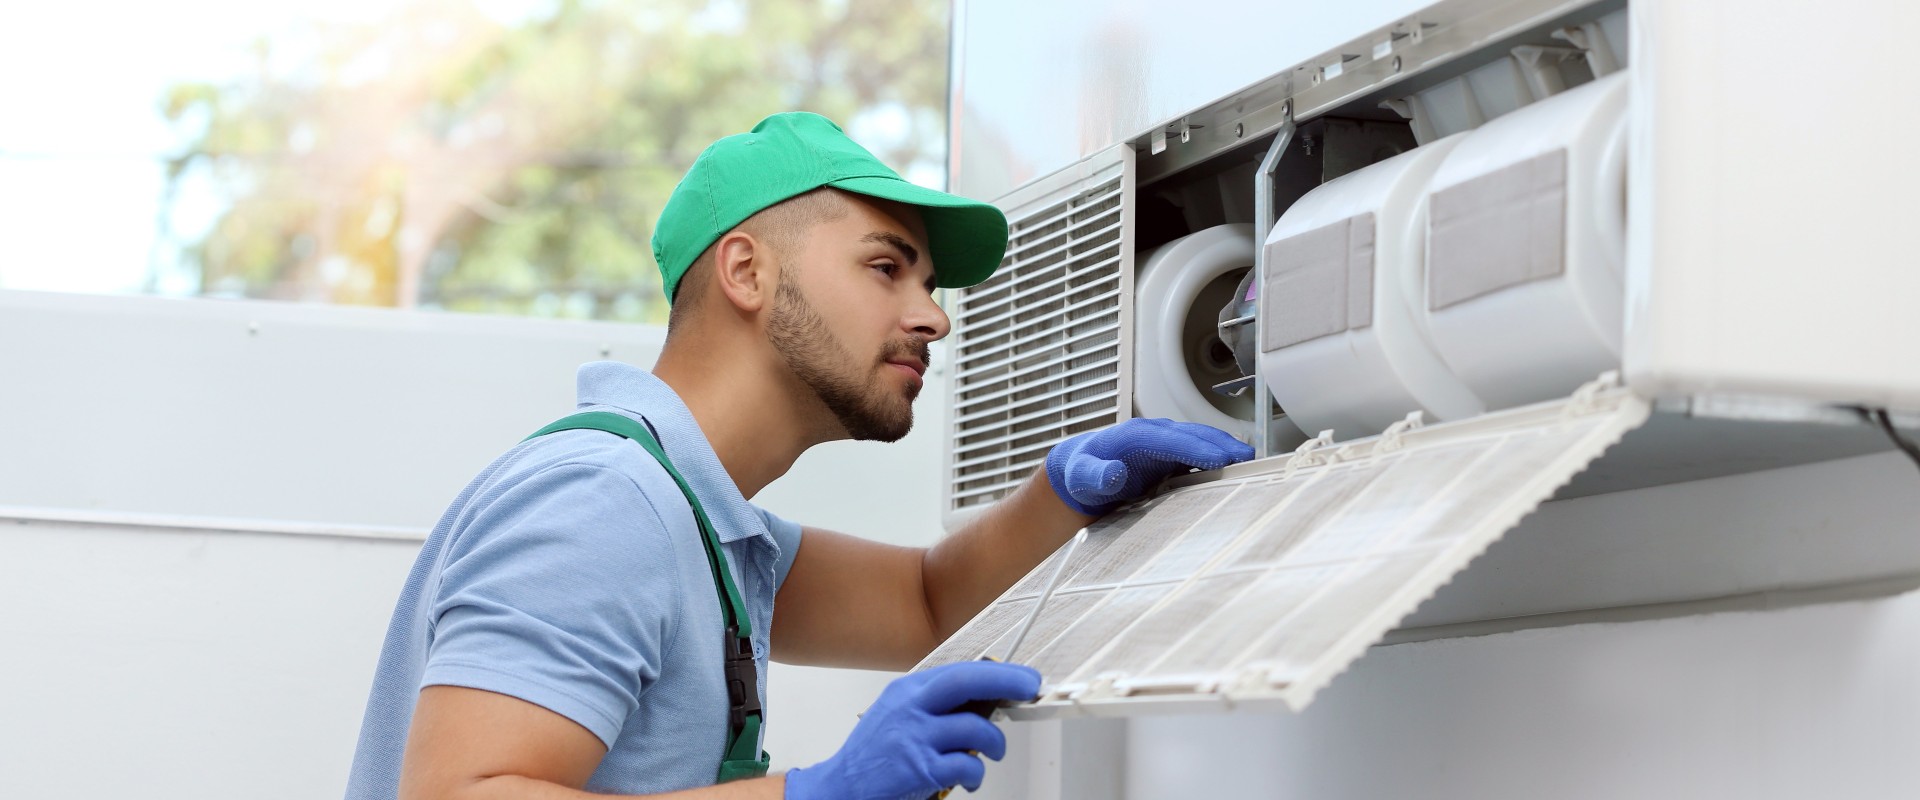 Why Do HVAC Companies Charge So Much Money?